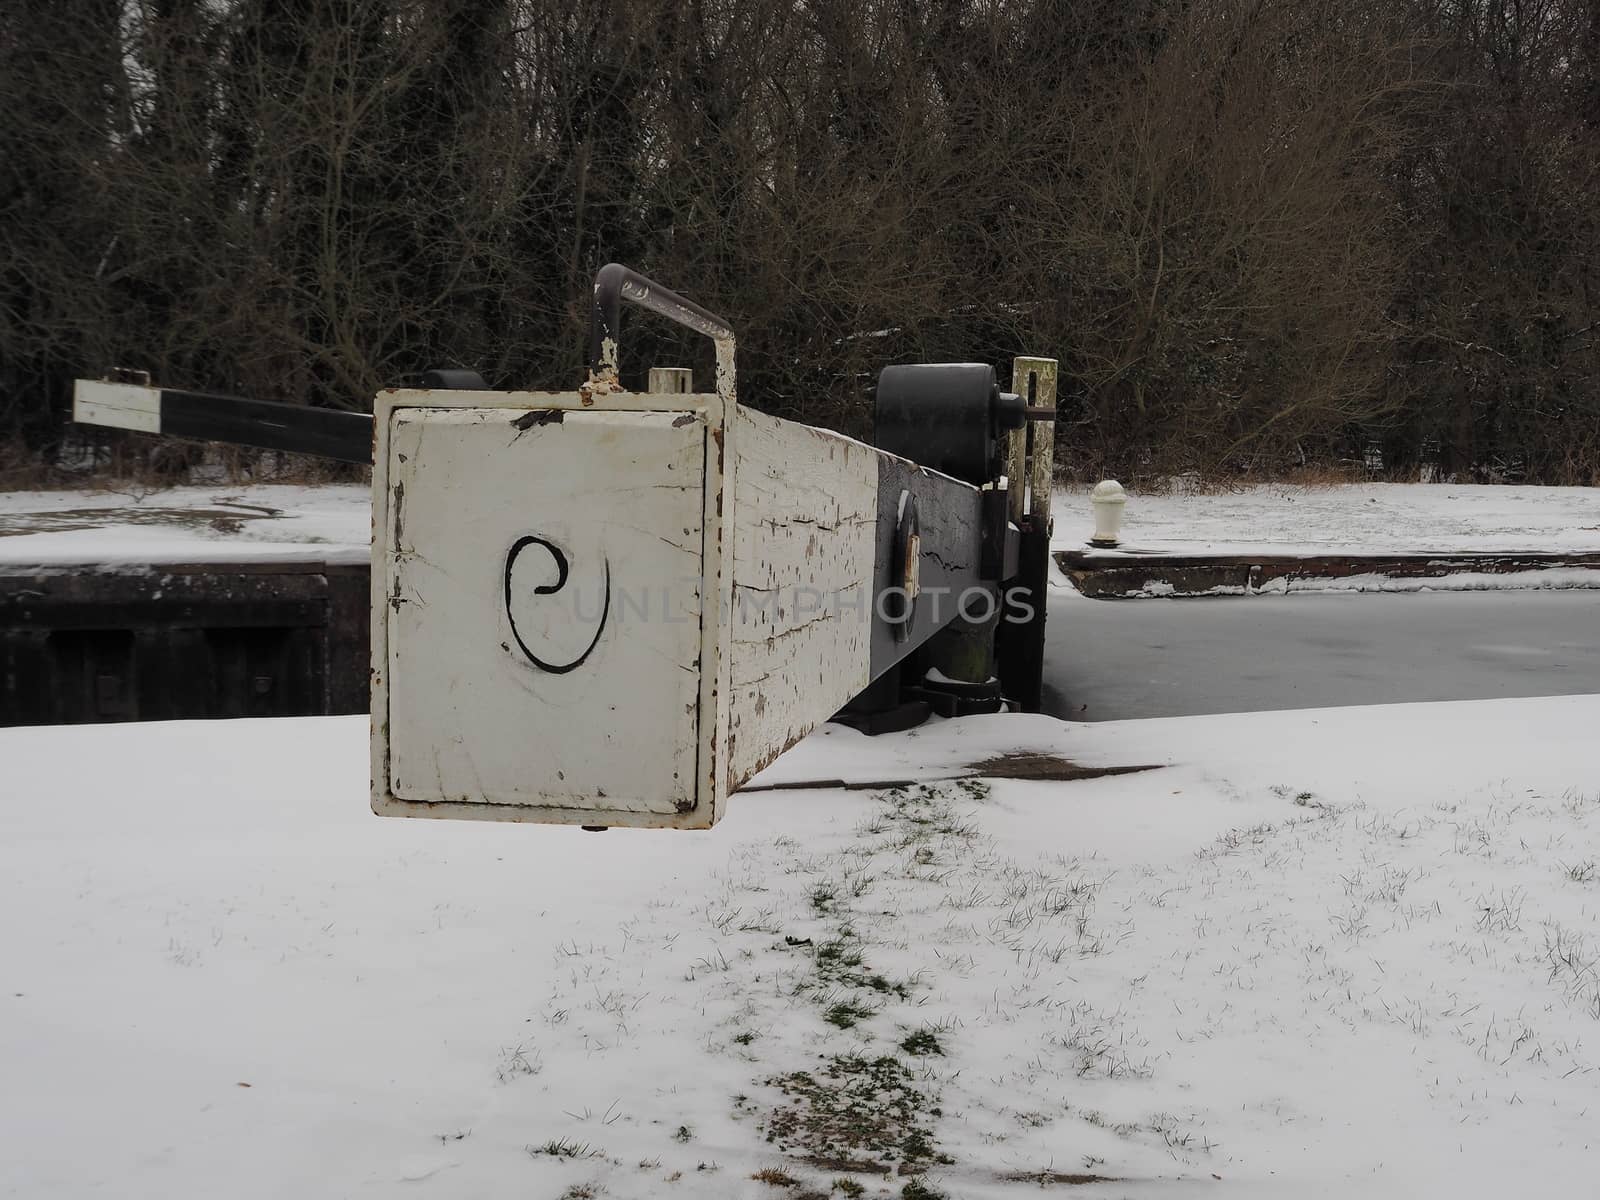 Lock gate in winter with snow on the ground and ice on the water, Padworth Lock, Kennet and Avon Canal, Berkshire, UK